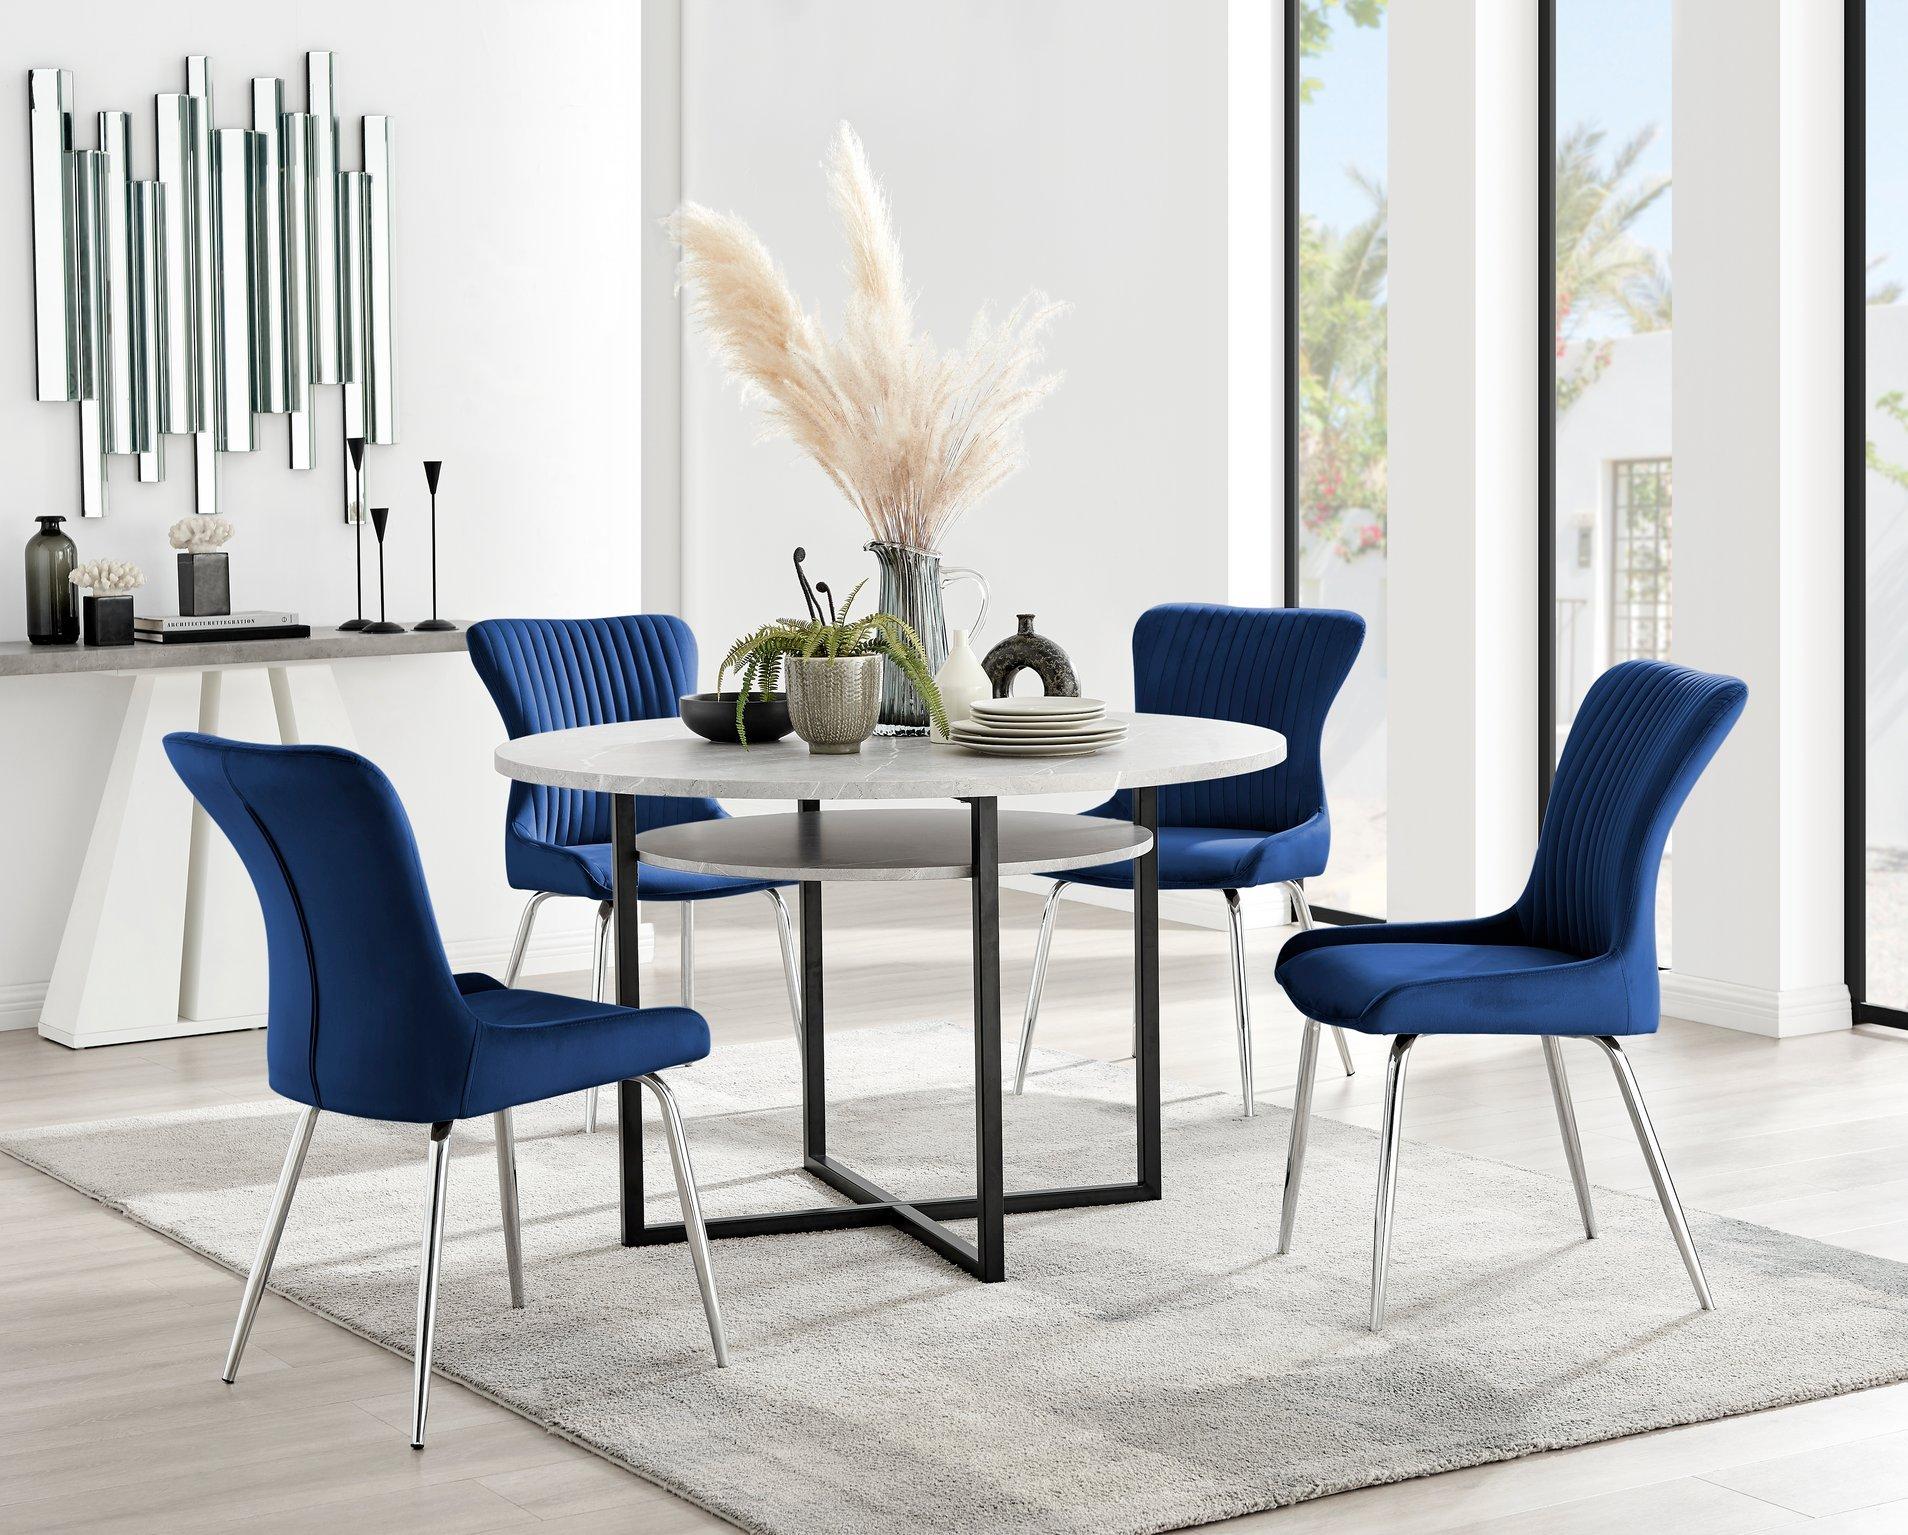 Adley Grey Concrete Effect Round Dining Table & 4 Nora Silver Leg Velvet Chairs